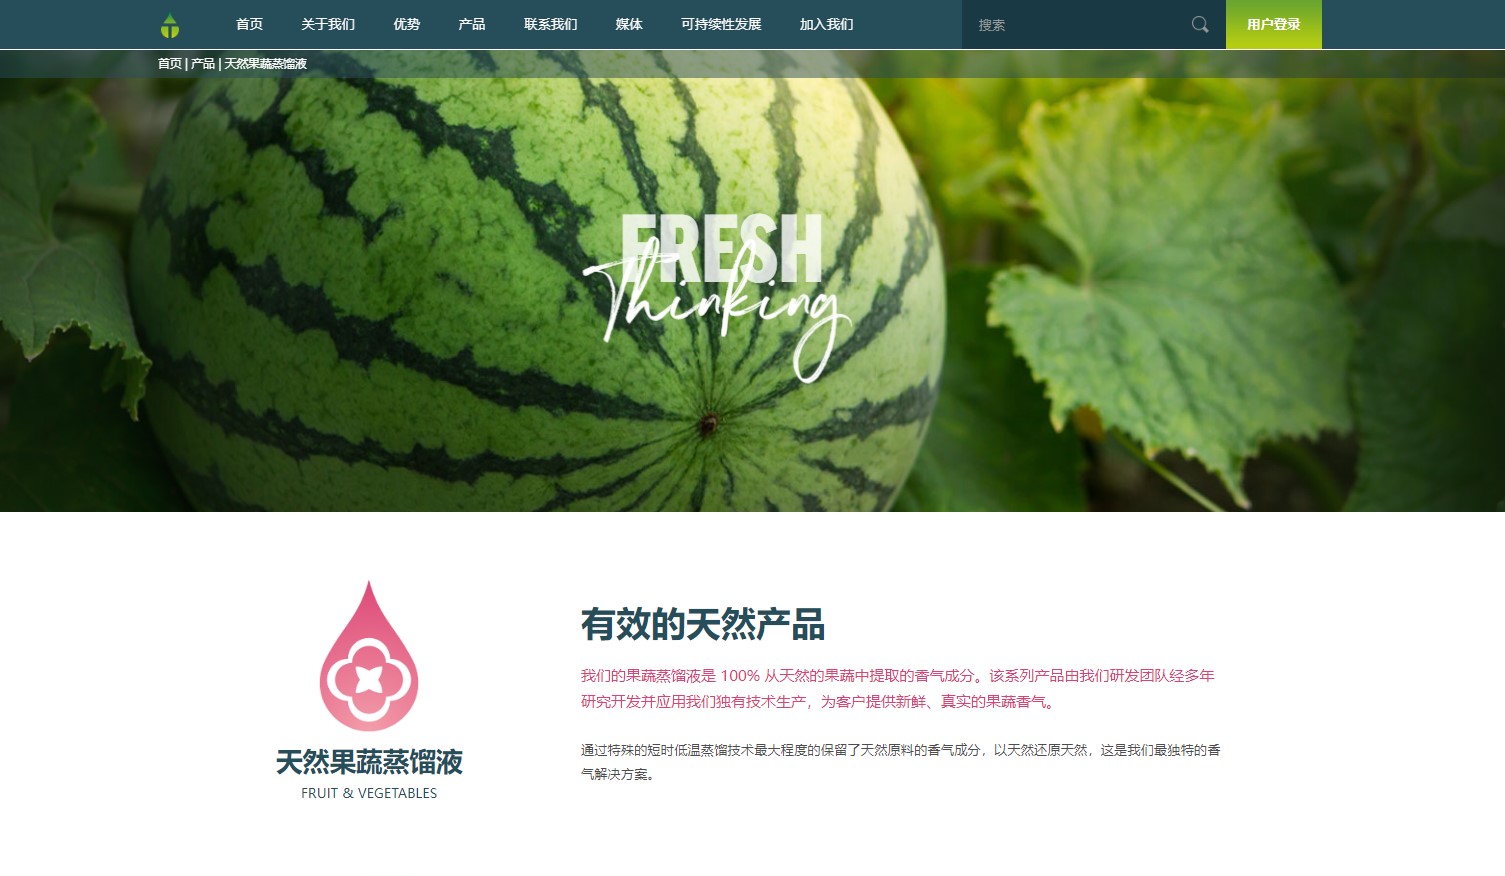 The new look Treatt China website launched in May